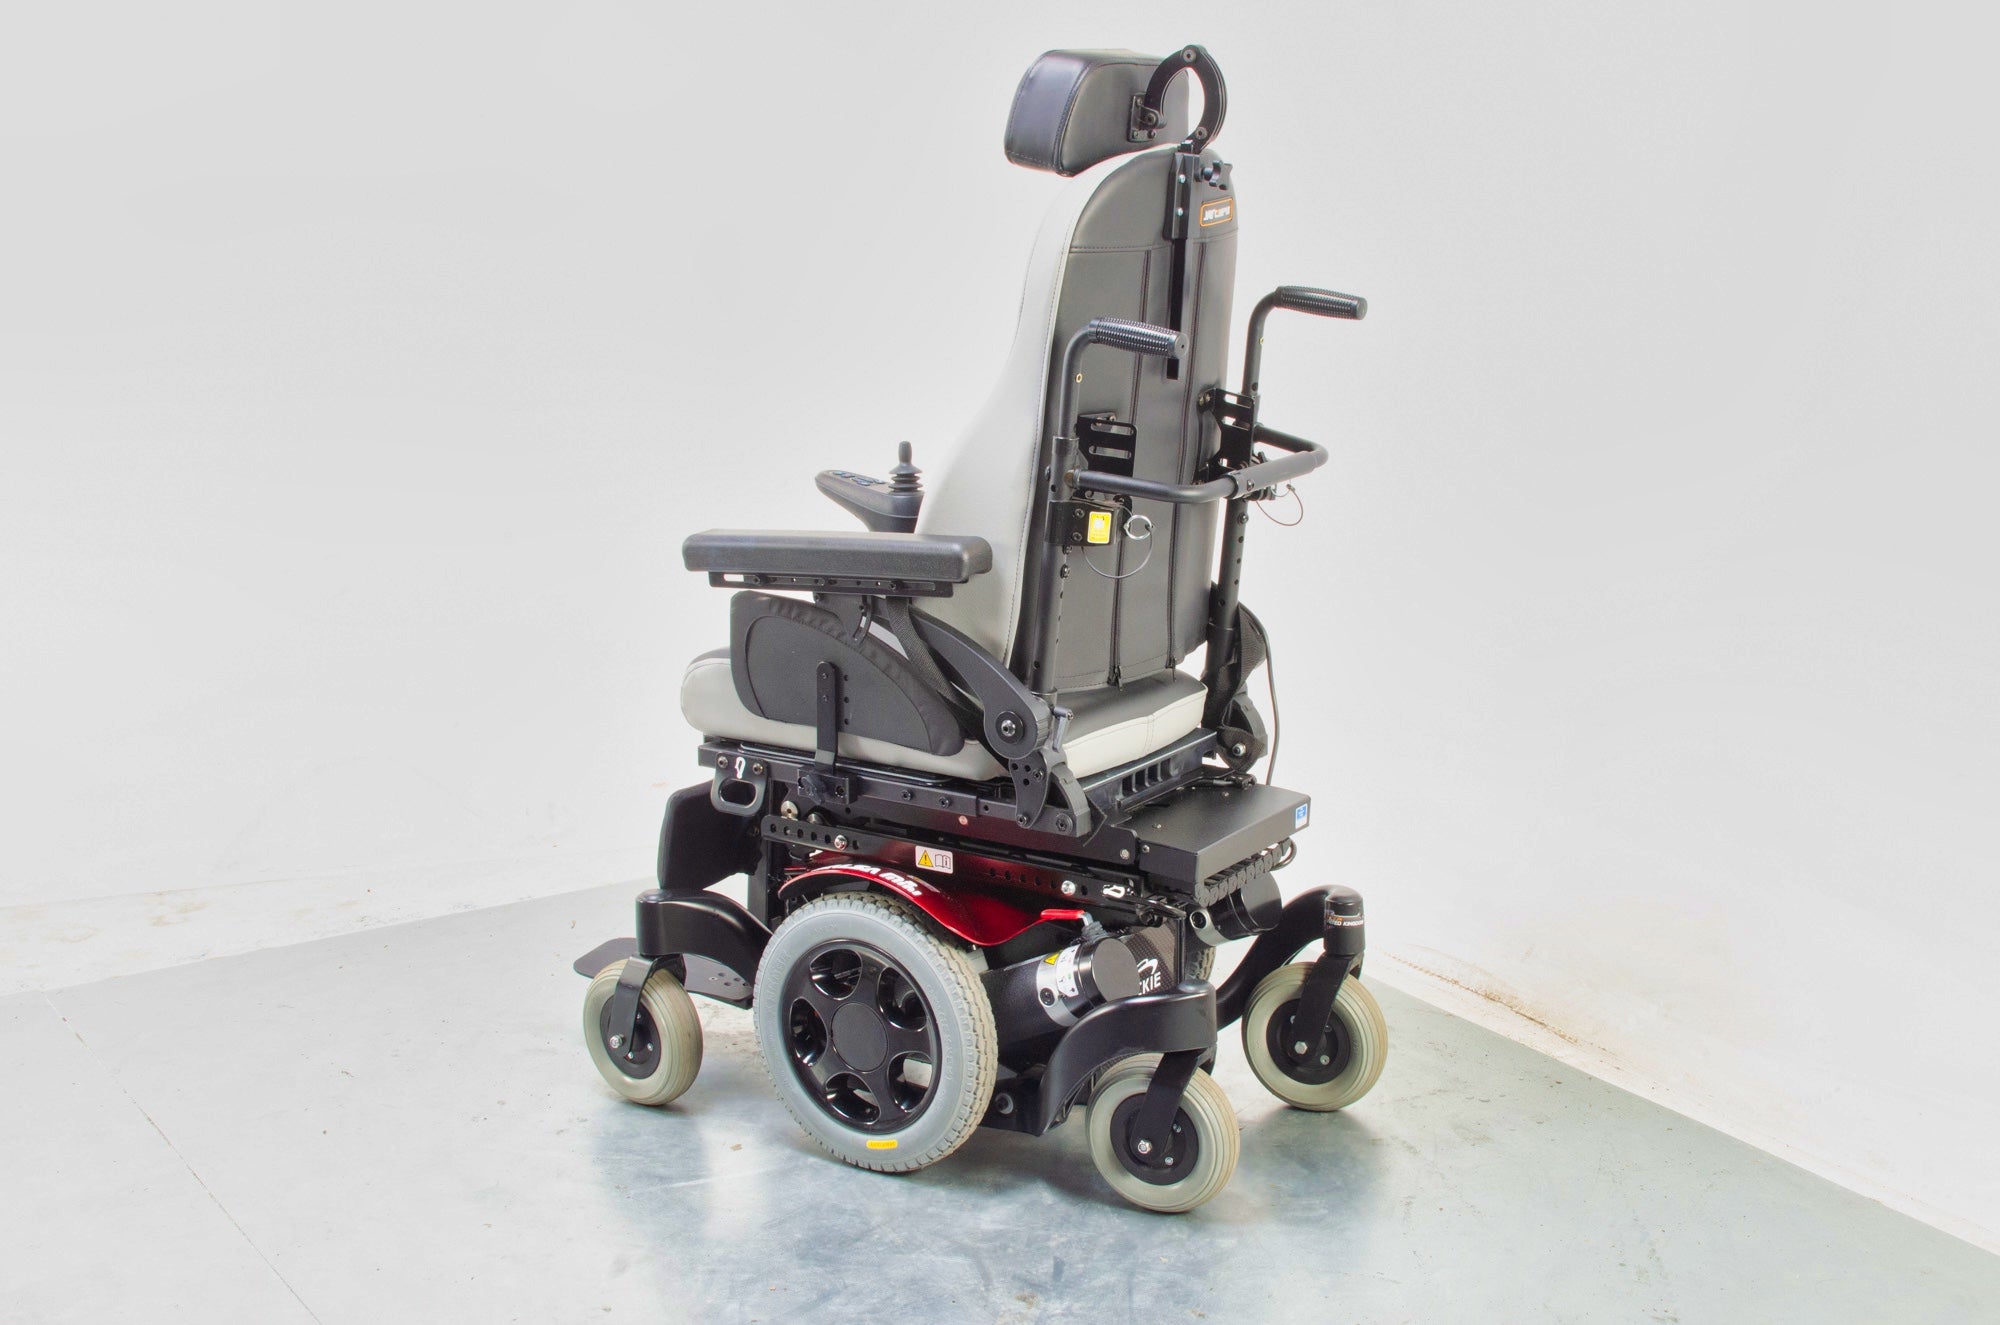 Quickie Salsa M2 6mph Used Electric Wheelchair Powerchair Power Tilt Sunrise Medical Outdoor MWD